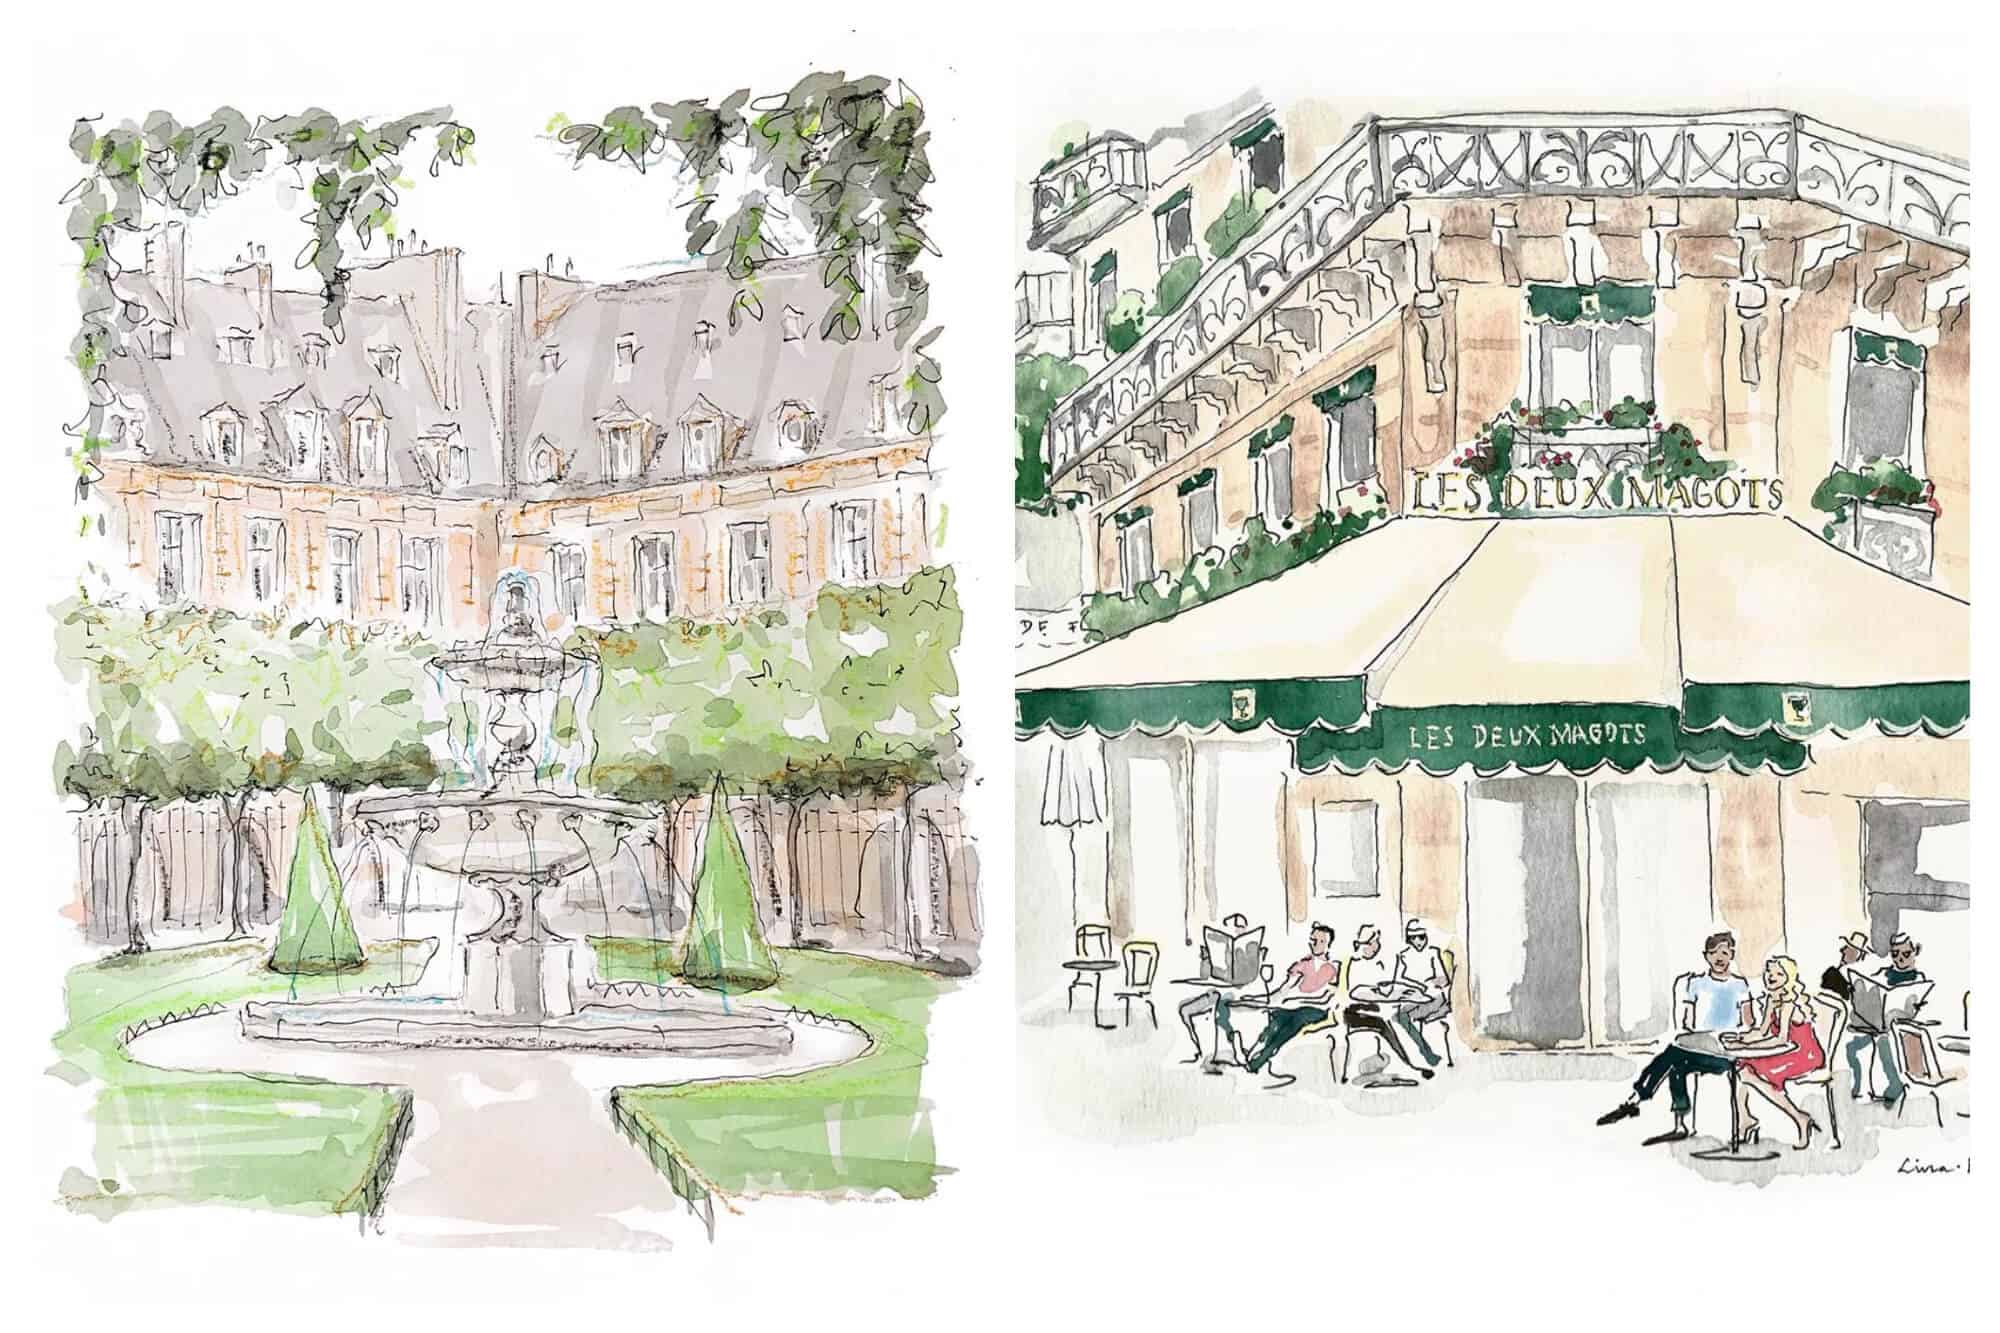 Left: A watercolor painting of a park with a fountain in the middle. There are buildings surrounding the park. Right: A watercolor of a Parisian cafe called Les Deux Magots. There are people sitting at tables outside and there is a green and cream colored awning.